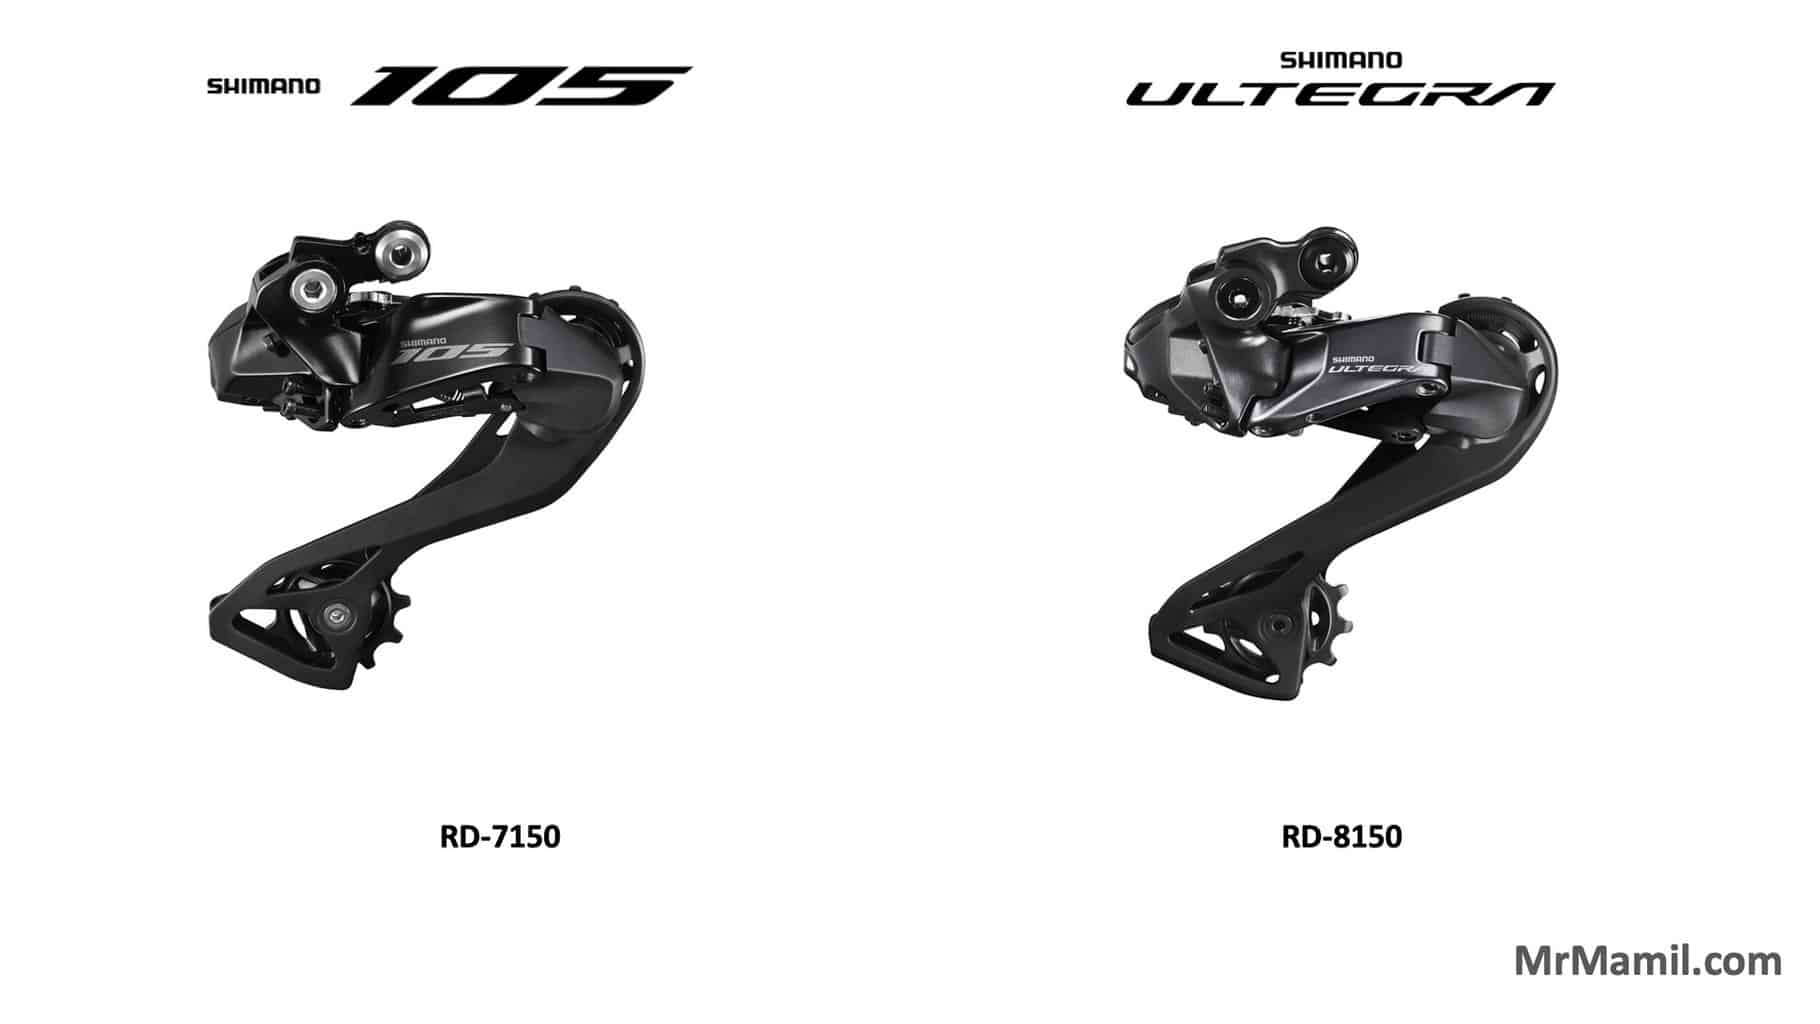 Side-by-side comparison of Shimano bicycle rear derailleurs. On the left, a Shimano 105 Di2 RD labeled RD-7150. On the right, a Shimano Ultegra Di2 RD labeled RD-8150.